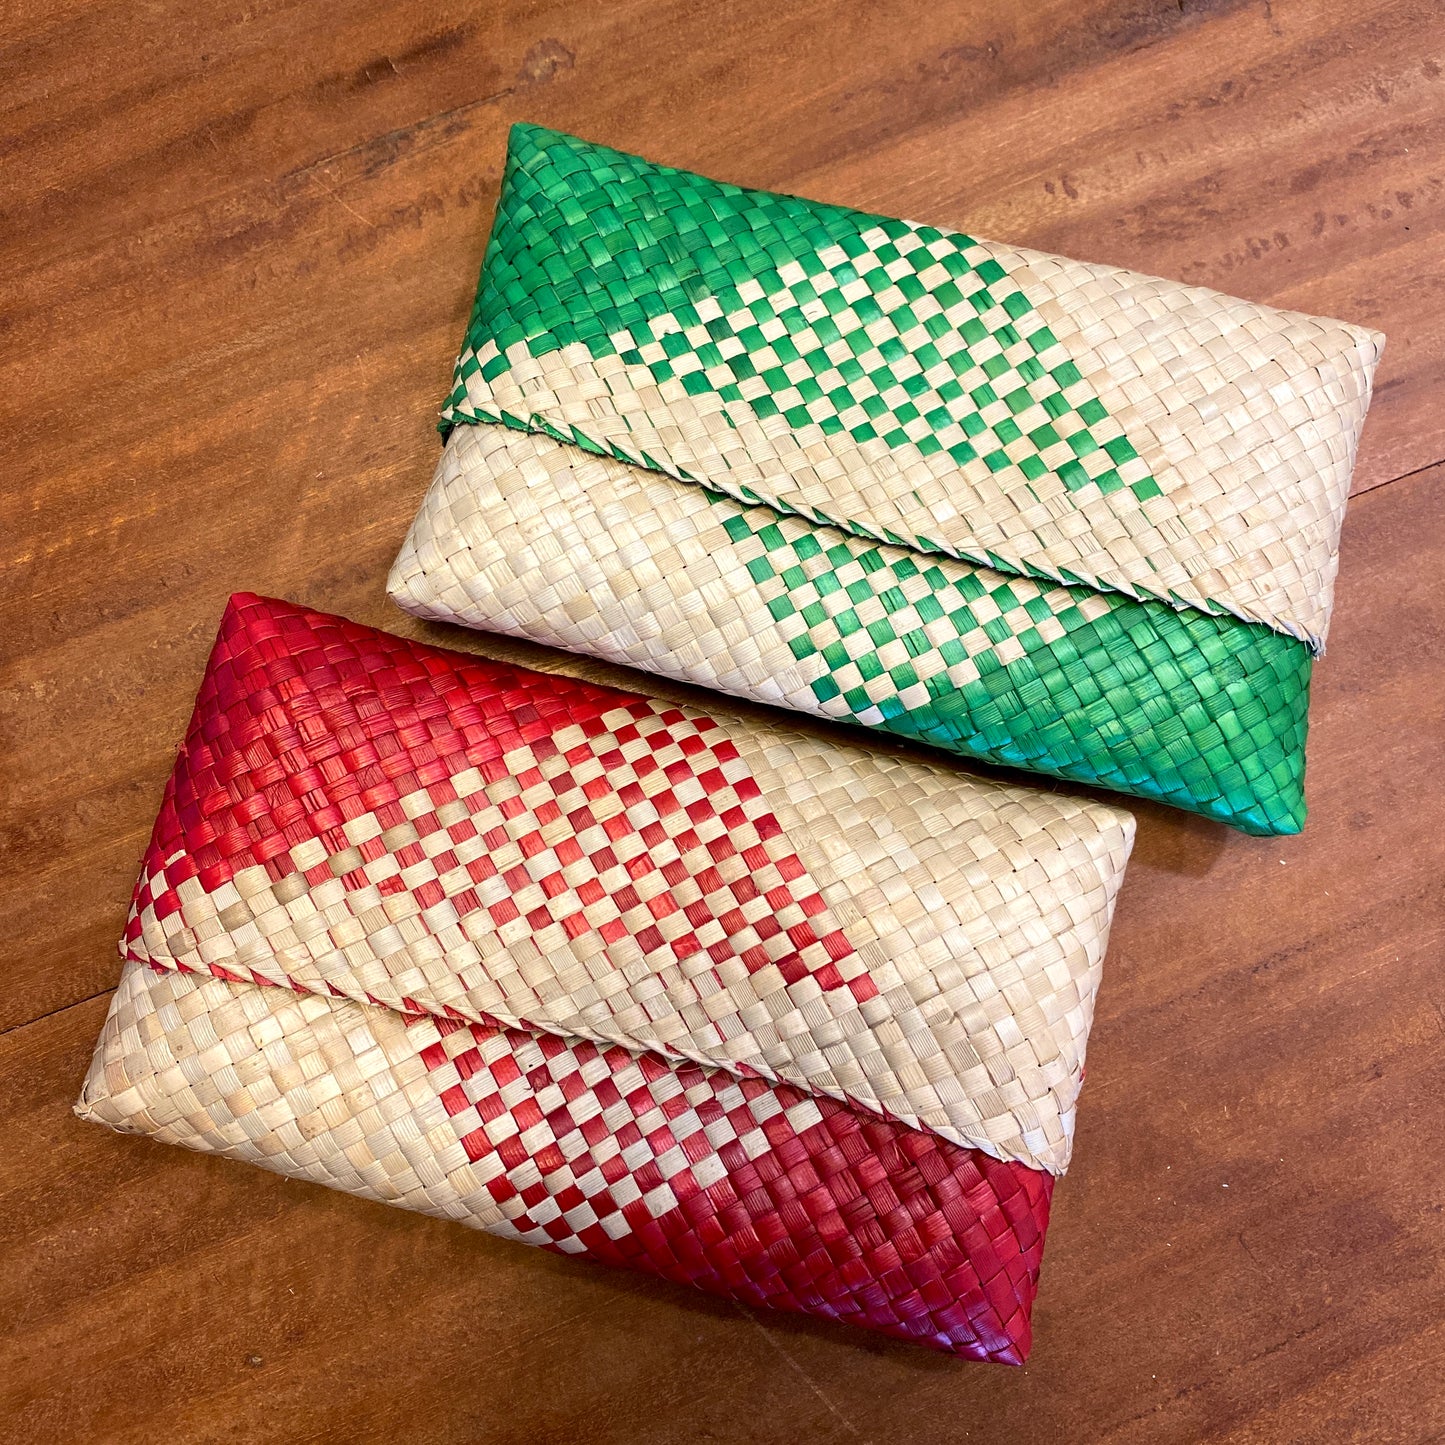 Mengkuang handwoven Pouch